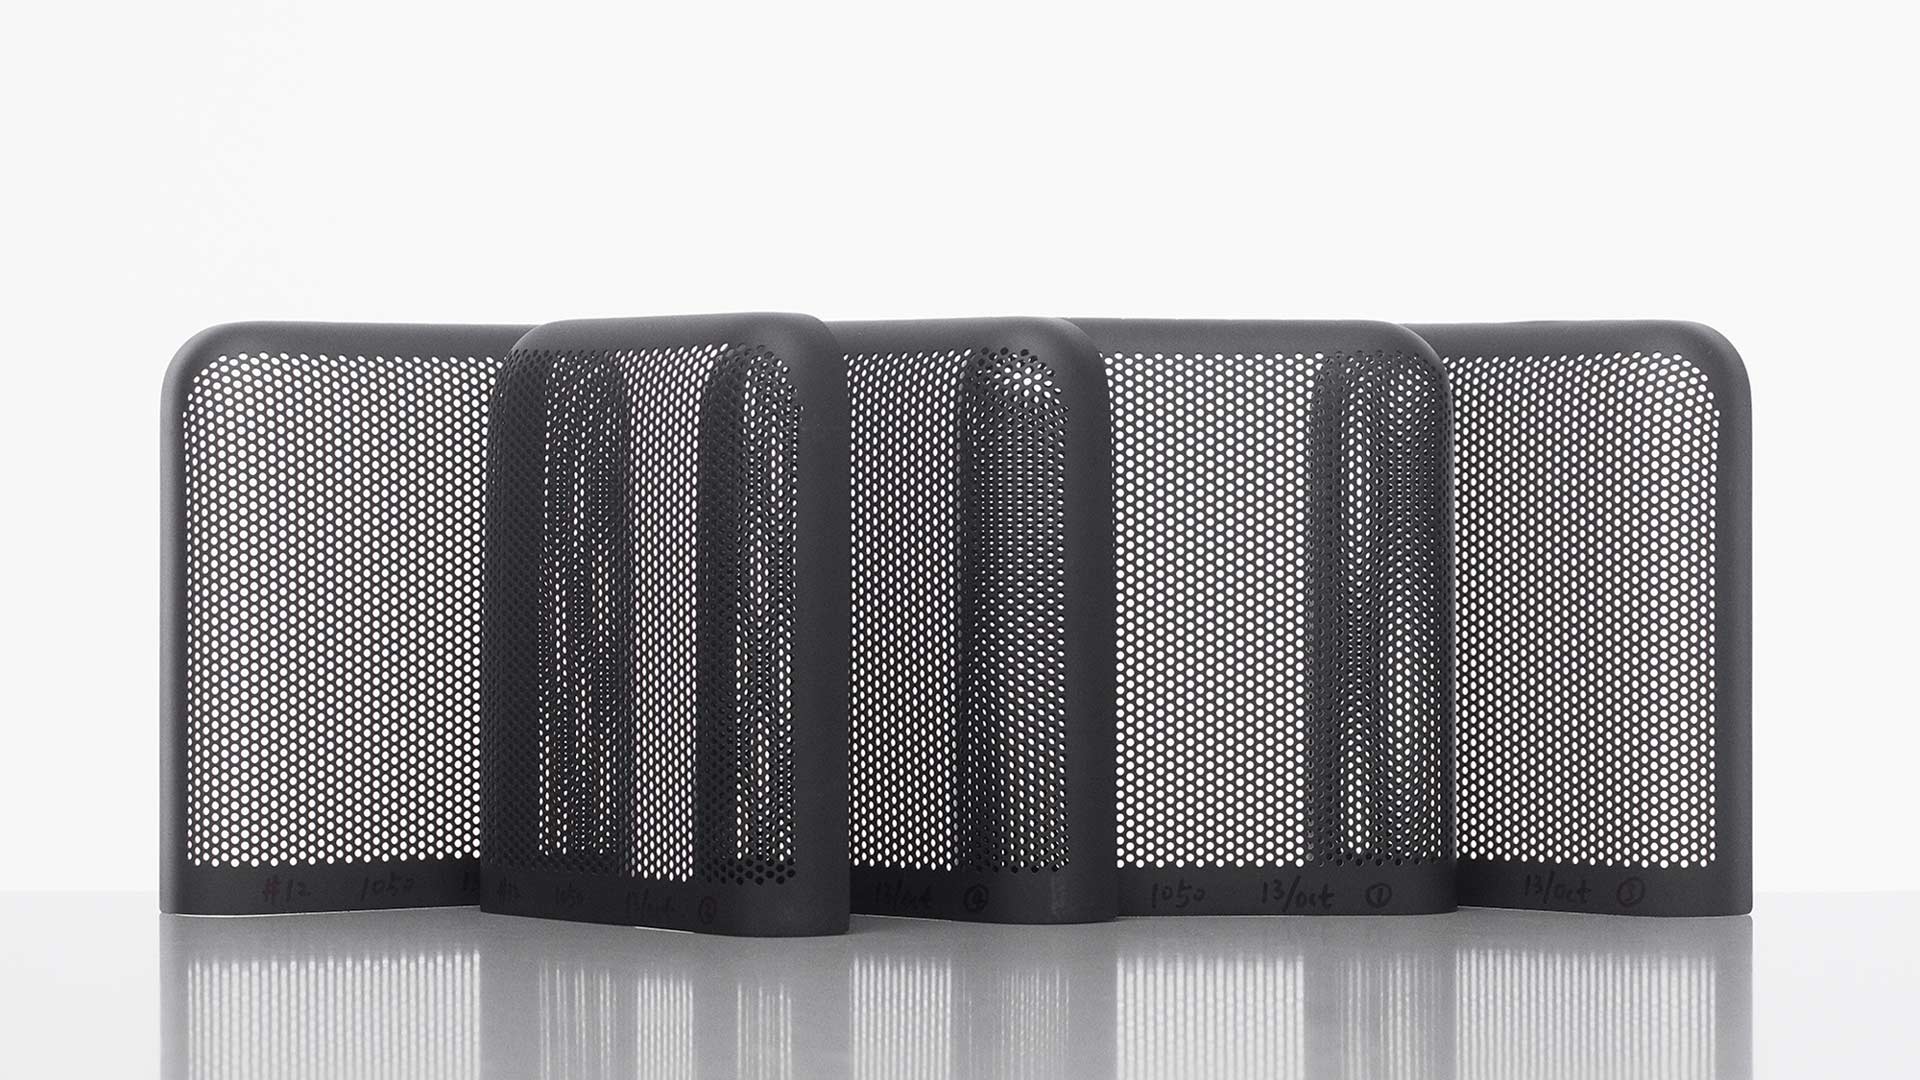 bang and olufsen beoplay p6